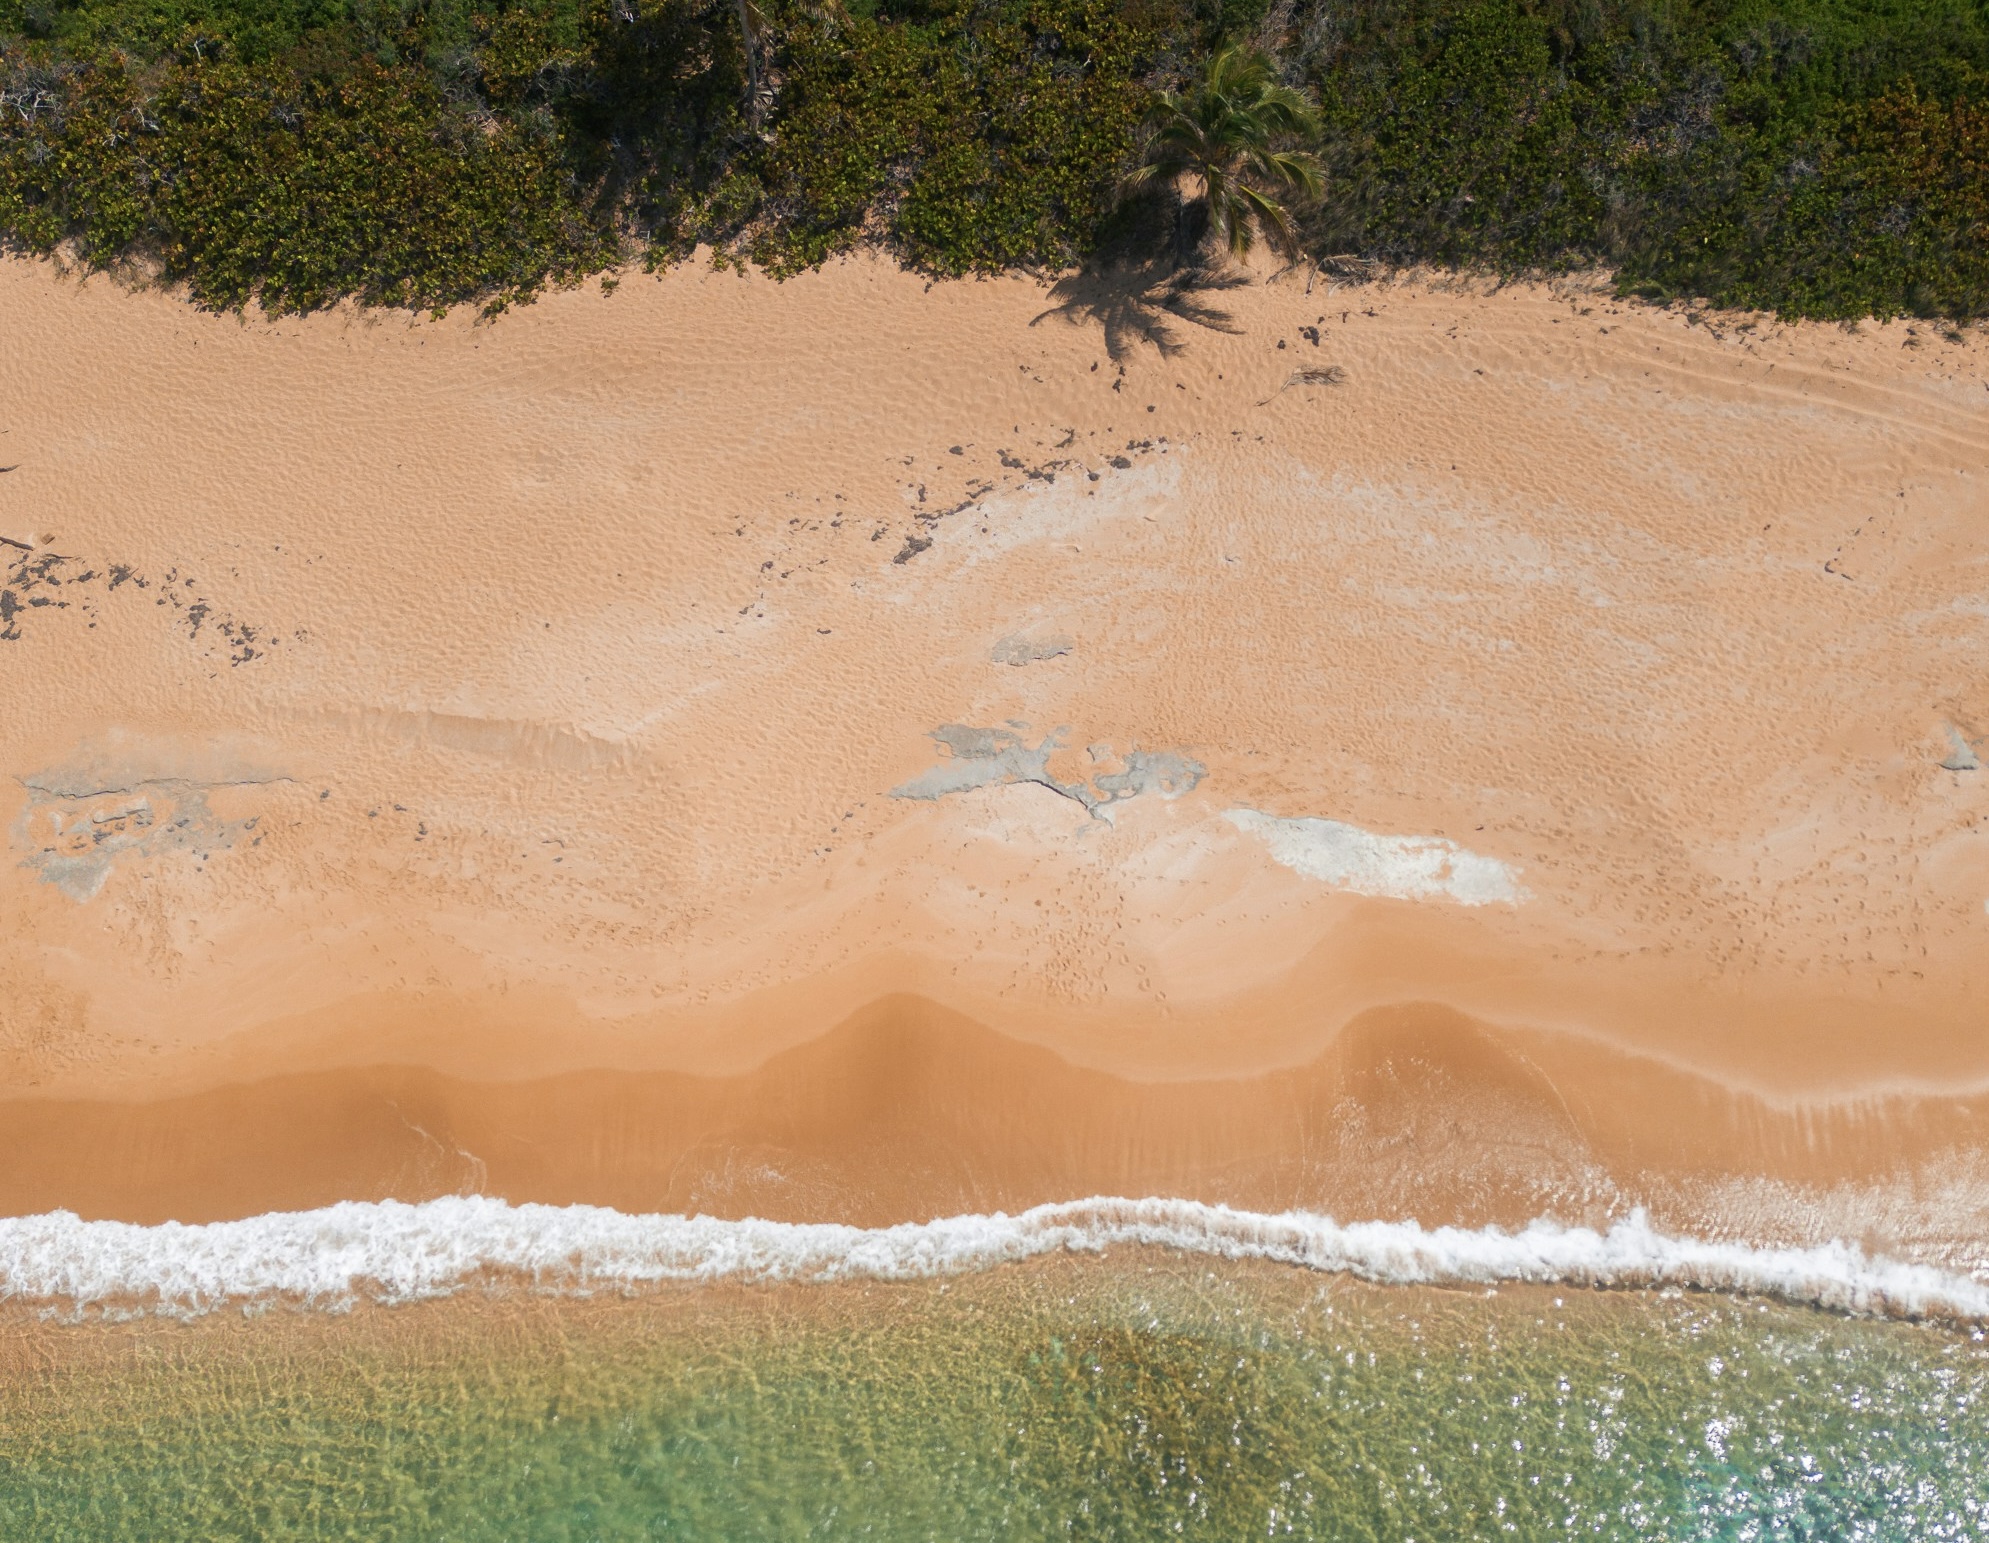 These are the best overall beaches located in Puerto Rico.
Pictured: a tan sandy beach with clear gentle waved coming onto the shore in Puerto Rico